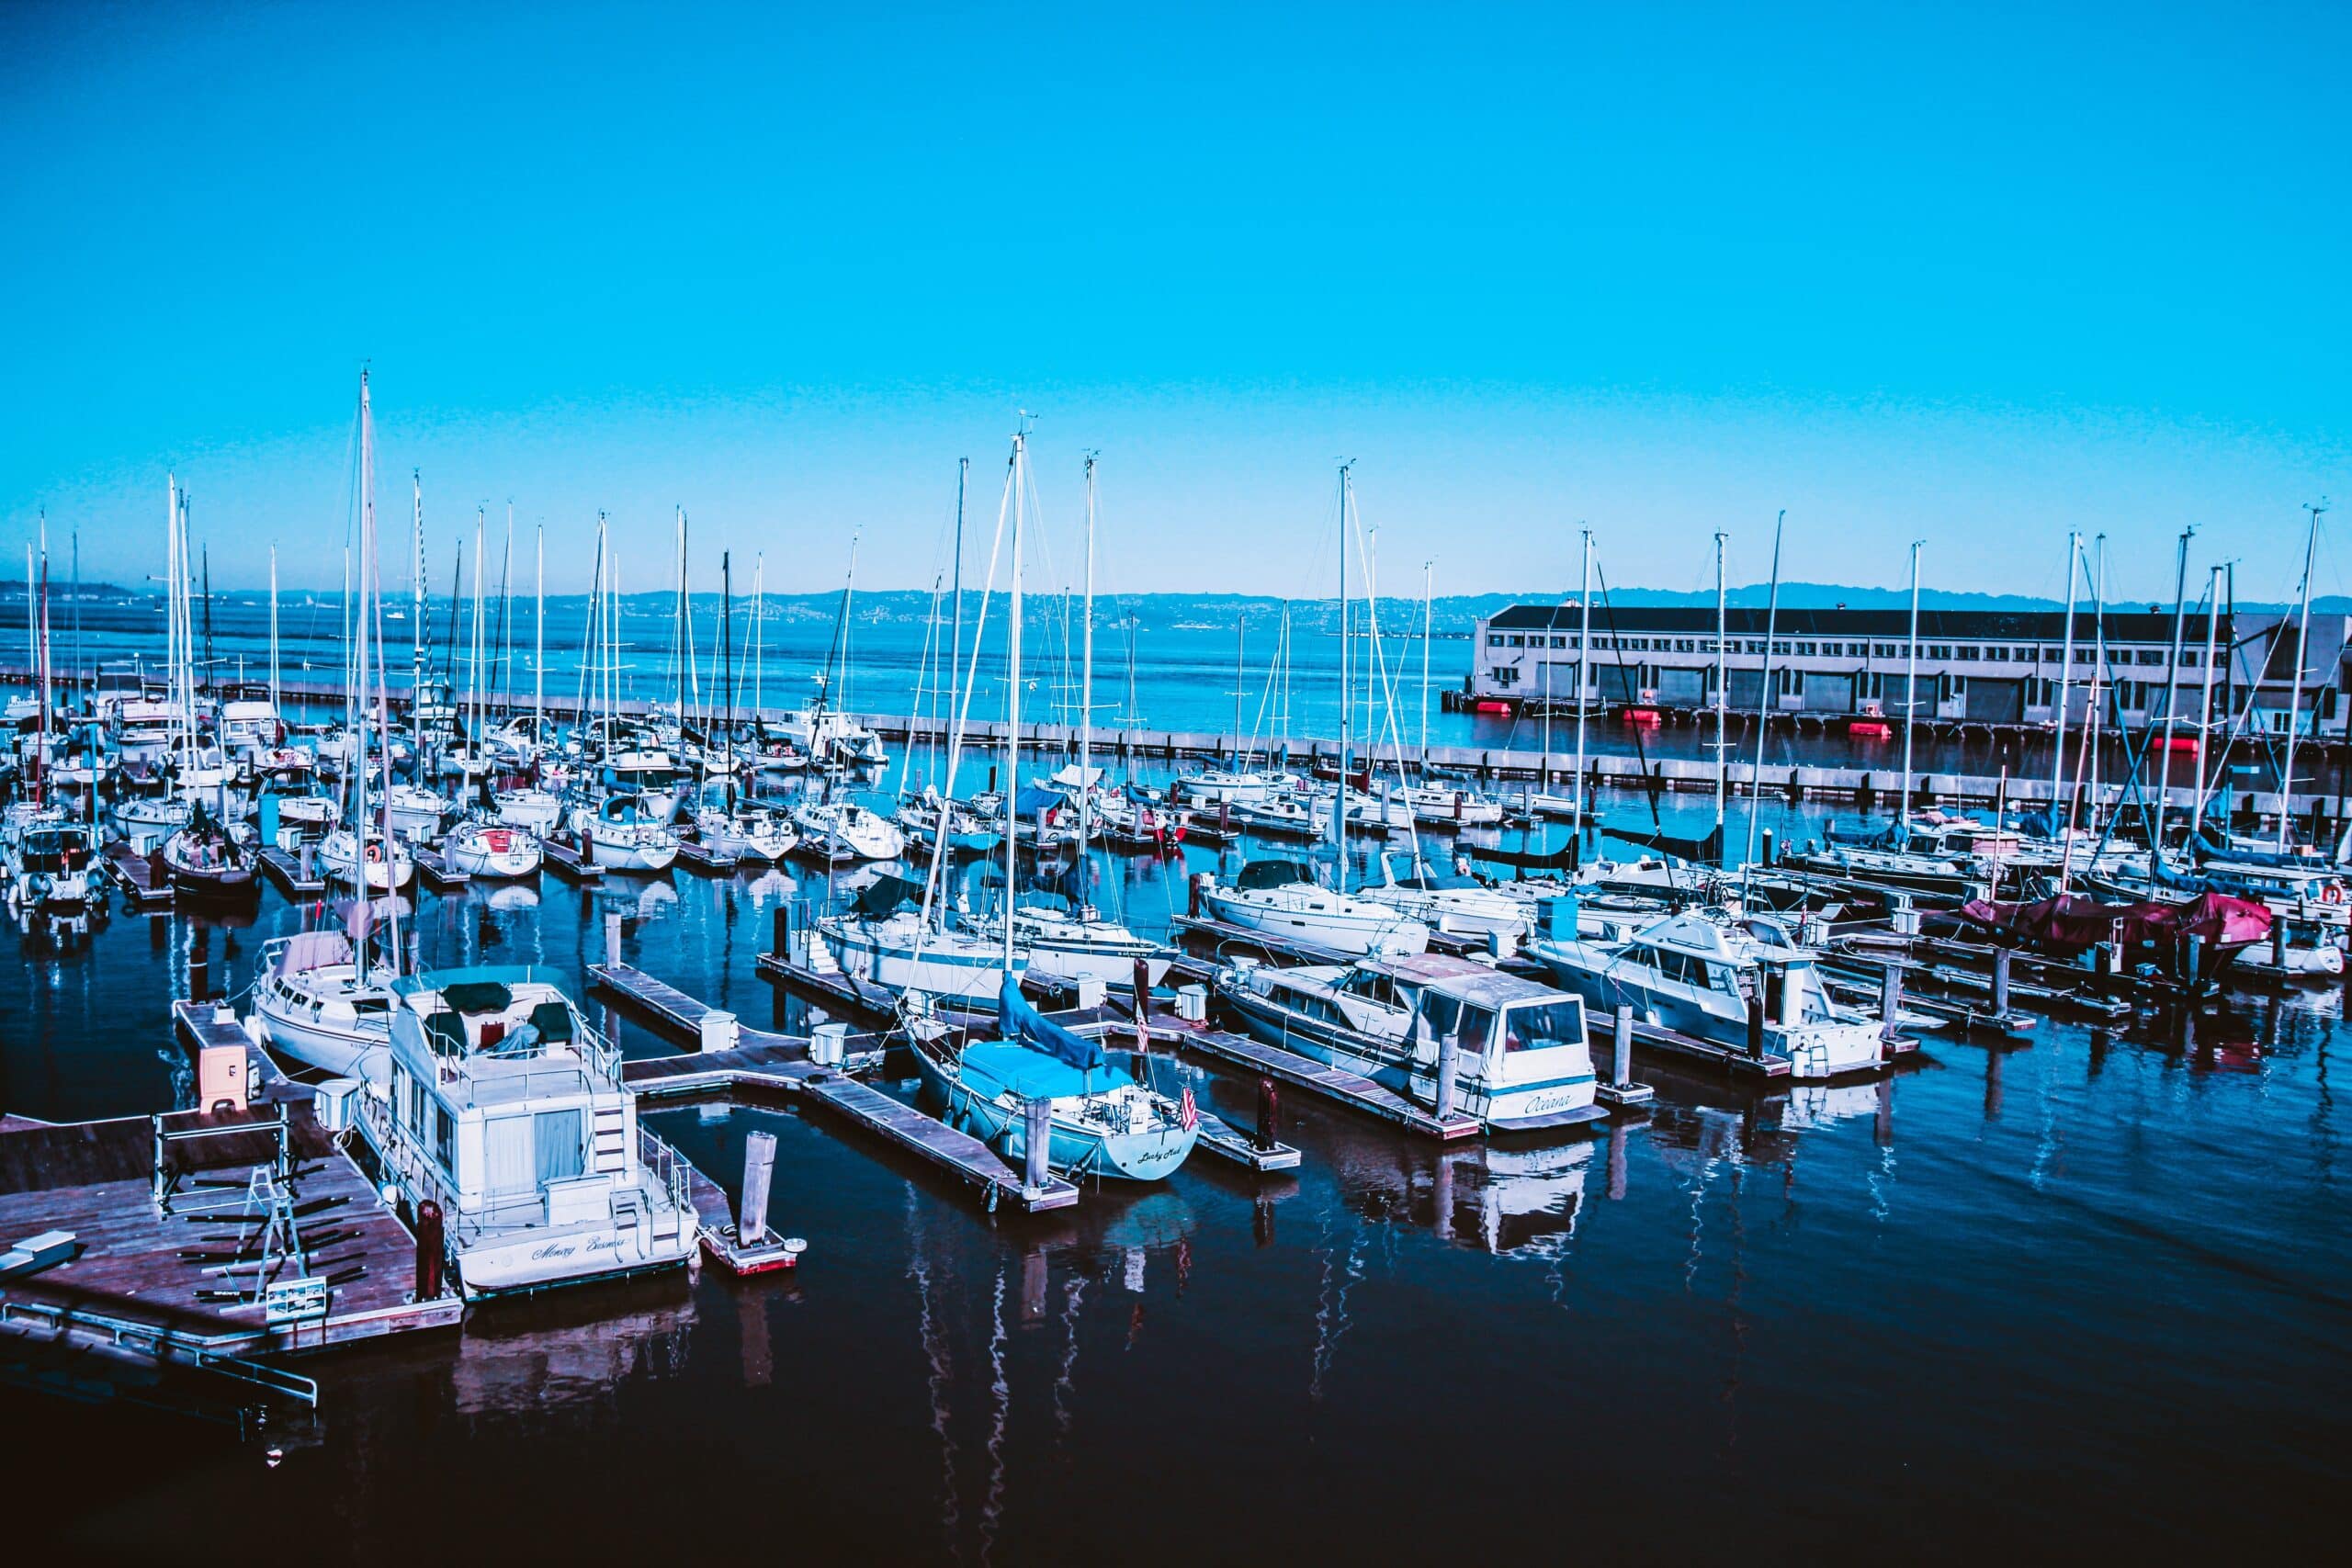 How a Marine Management Software System can Provide a Higher Return on Investment for Multifaceted Marinas